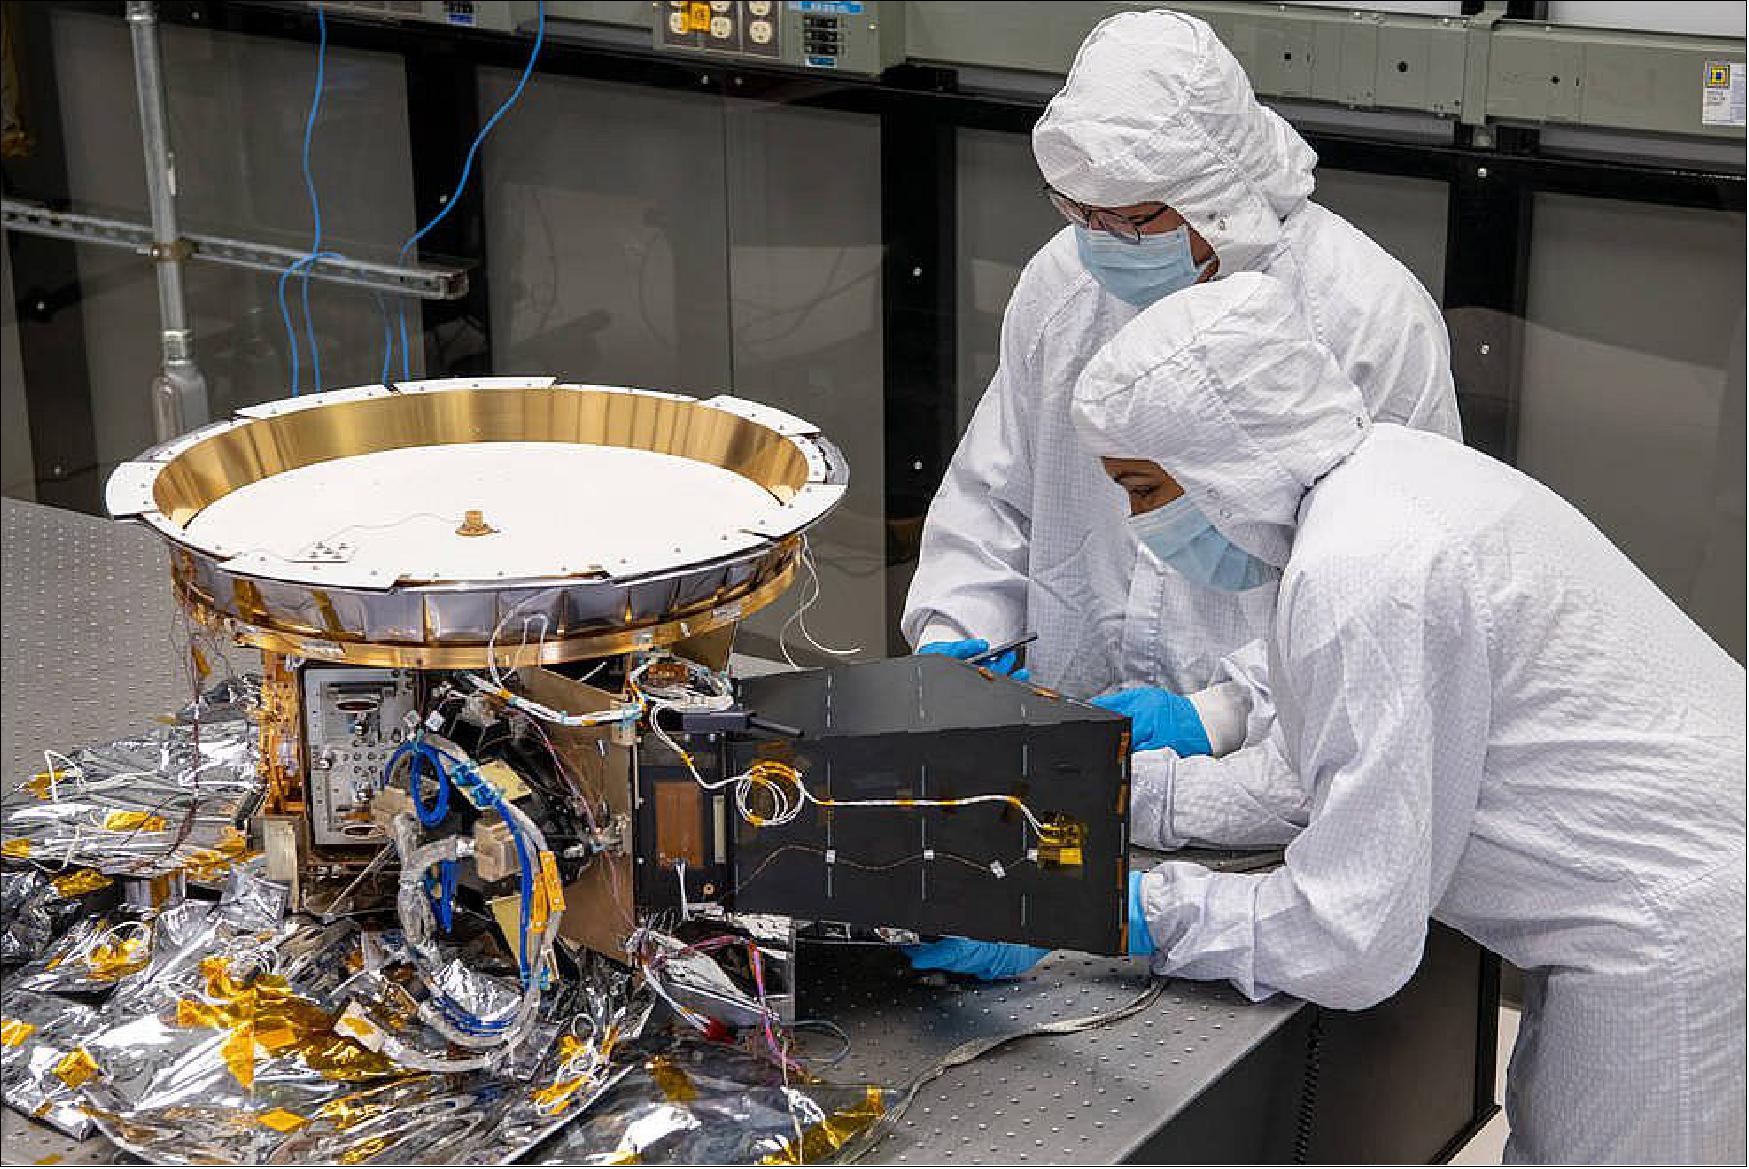 Figure 16: Two engineers work on L'Ralph, the most complicated instrument that will fly on the Lucy mission to Jupiter's Trojan asteroids. It is actually two instruments in one. The Multispectral Visible Imaging Camera (MVIC), will take visible light color images. The Linear Etalon Imaging Spectral Array (LEISA), will collect infrared spectra (image credits: NASA/Goddard/Barbara Lambert/Desiree Stover)